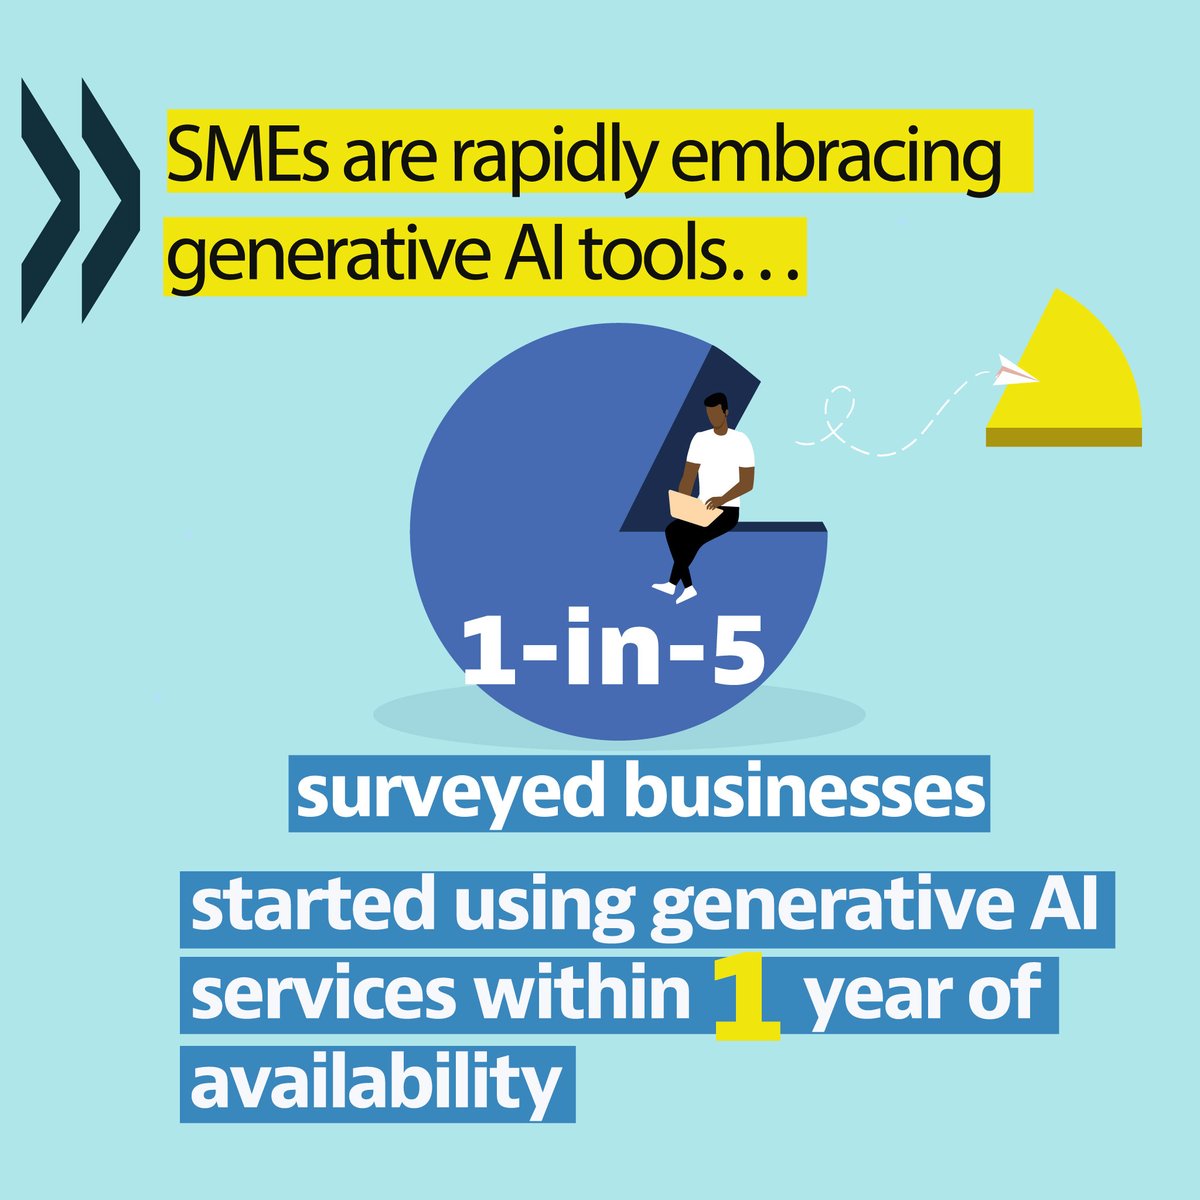 Are #SMEs using #AI tools such as #ChatGPT and #CoPilot? Our survey says yes. 1️⃣ in 5️⃣ businesses started using generative AI tools within 1 year of availability. Explore the full #D4SME survey 🔗brnw.ch/21wJztZ